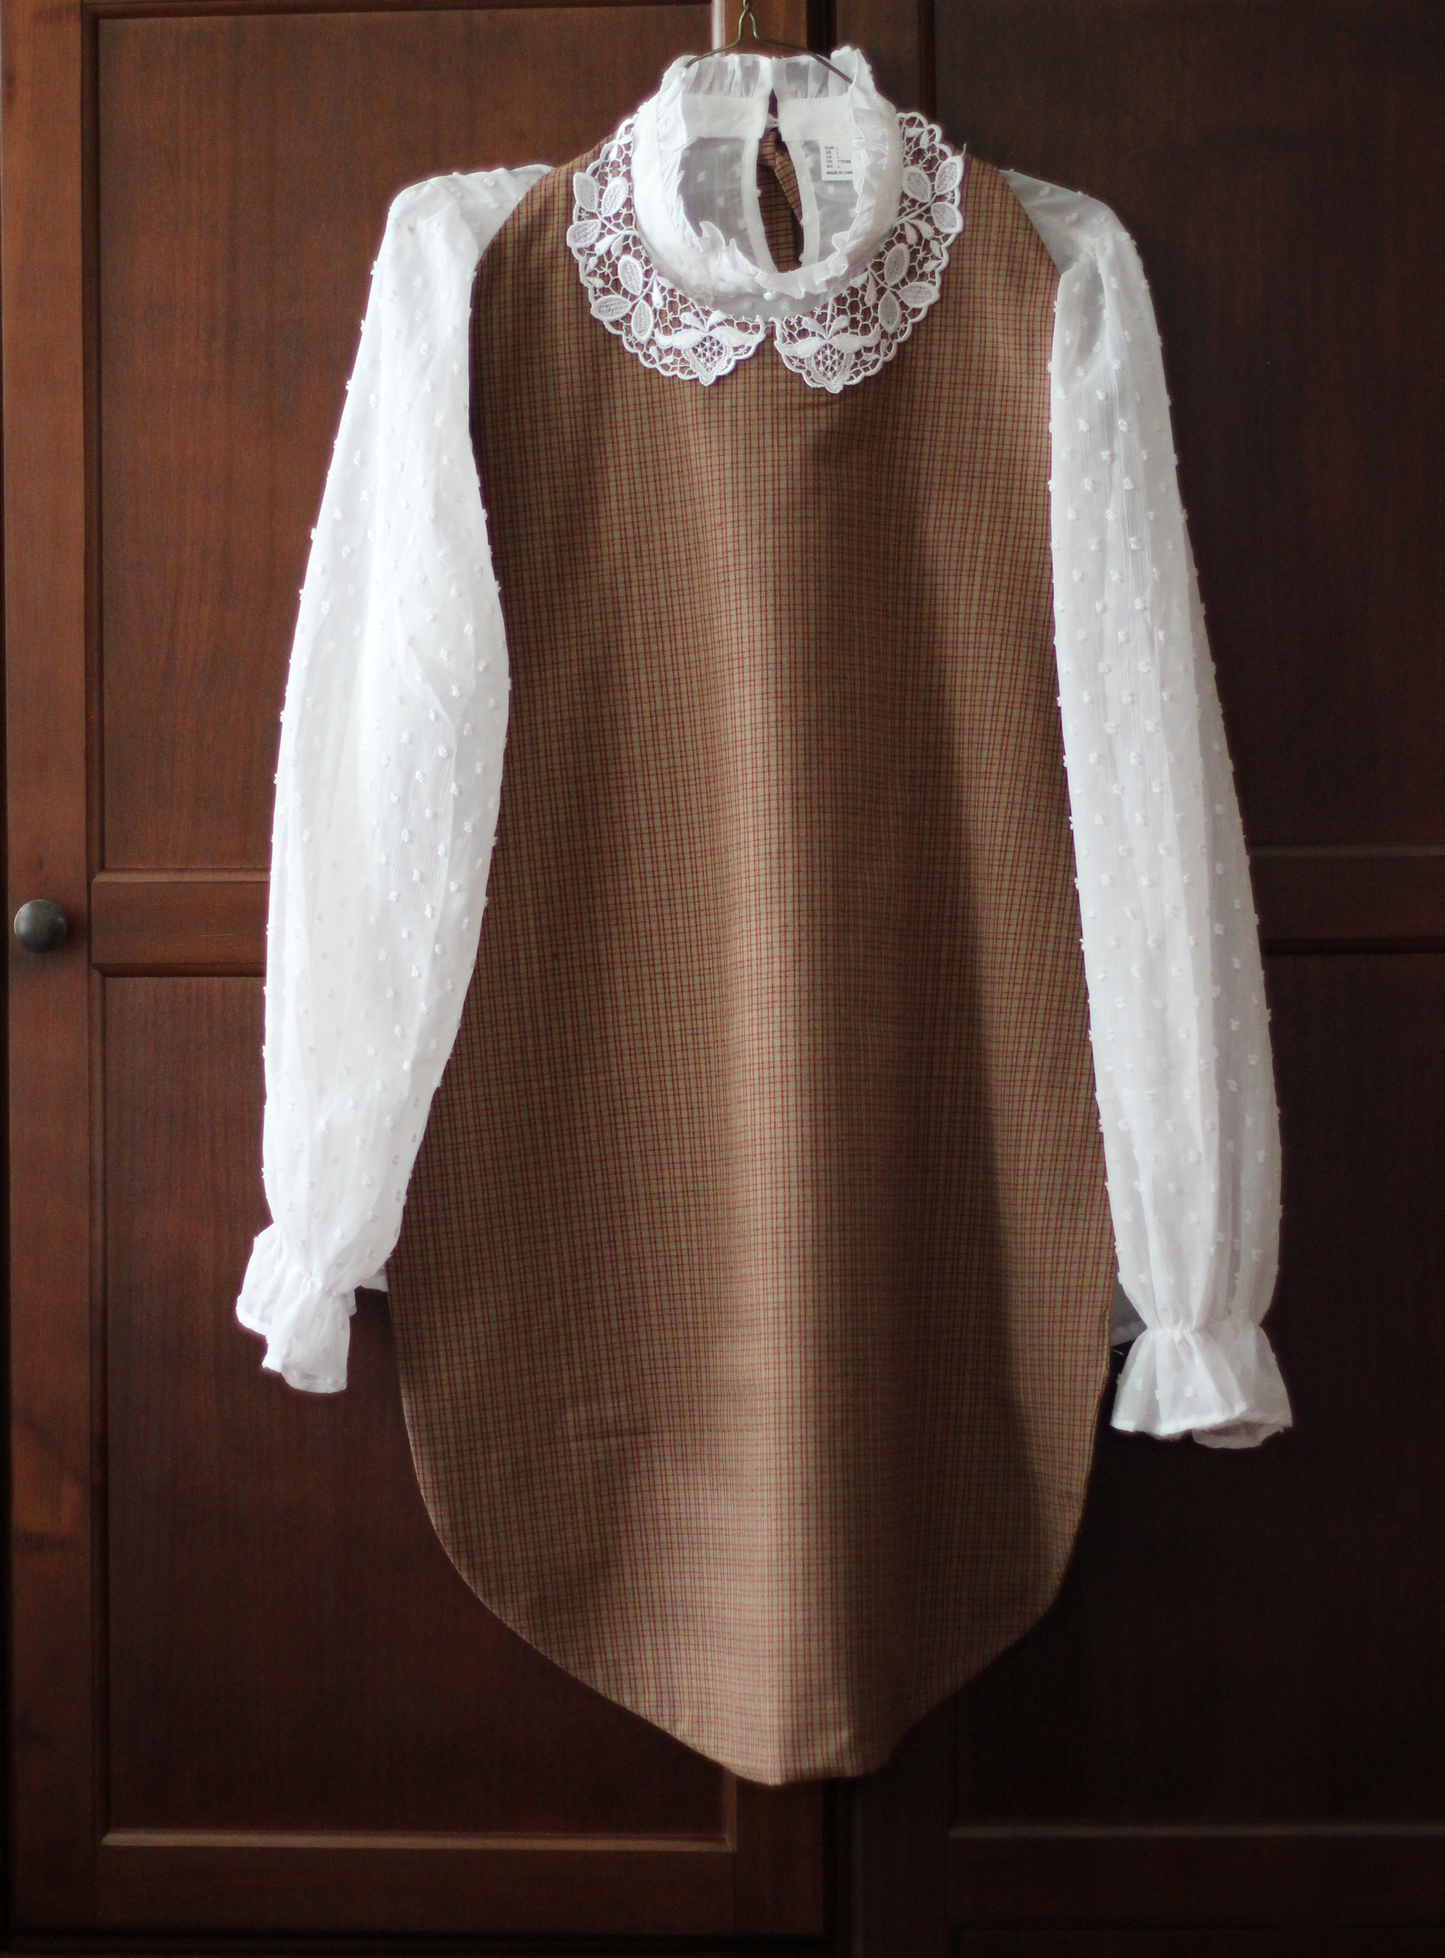 Very Long Homespun Bib trimmed with a lace collar.